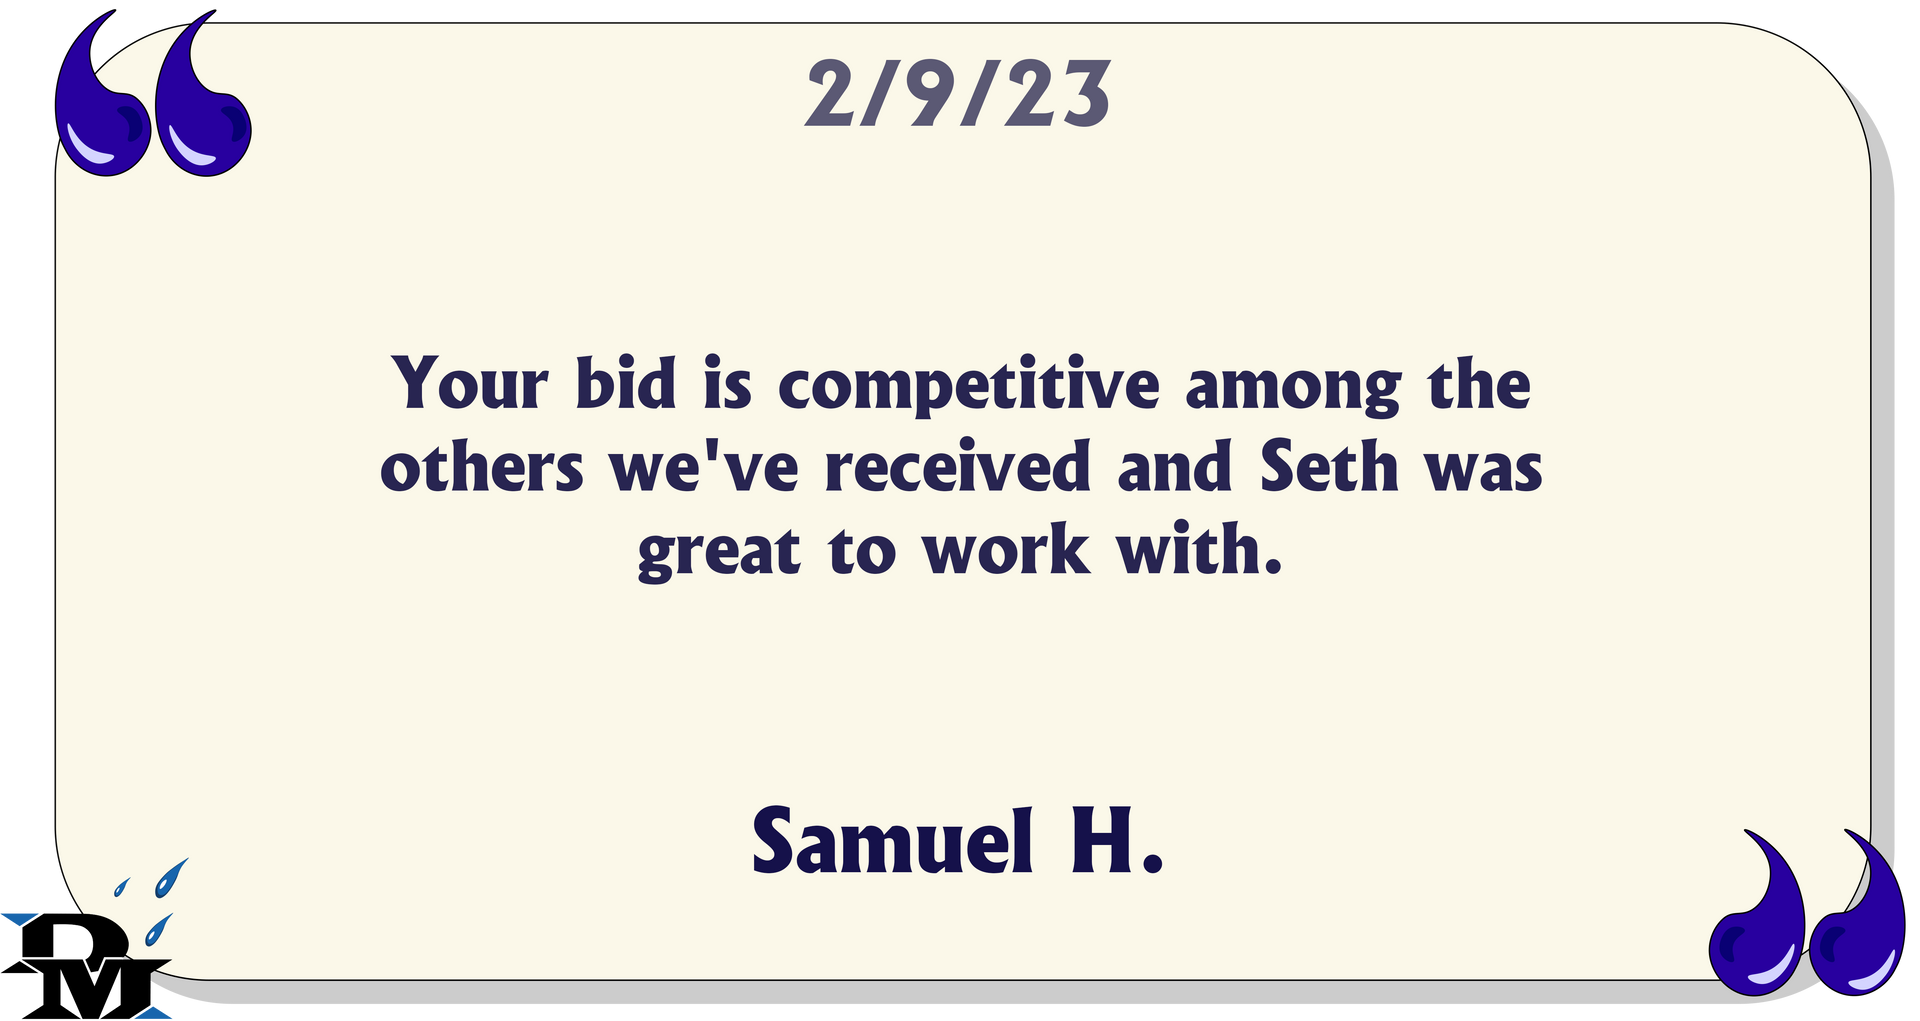 Your bid is competitive among the other's we've received and Seth was great to work with.